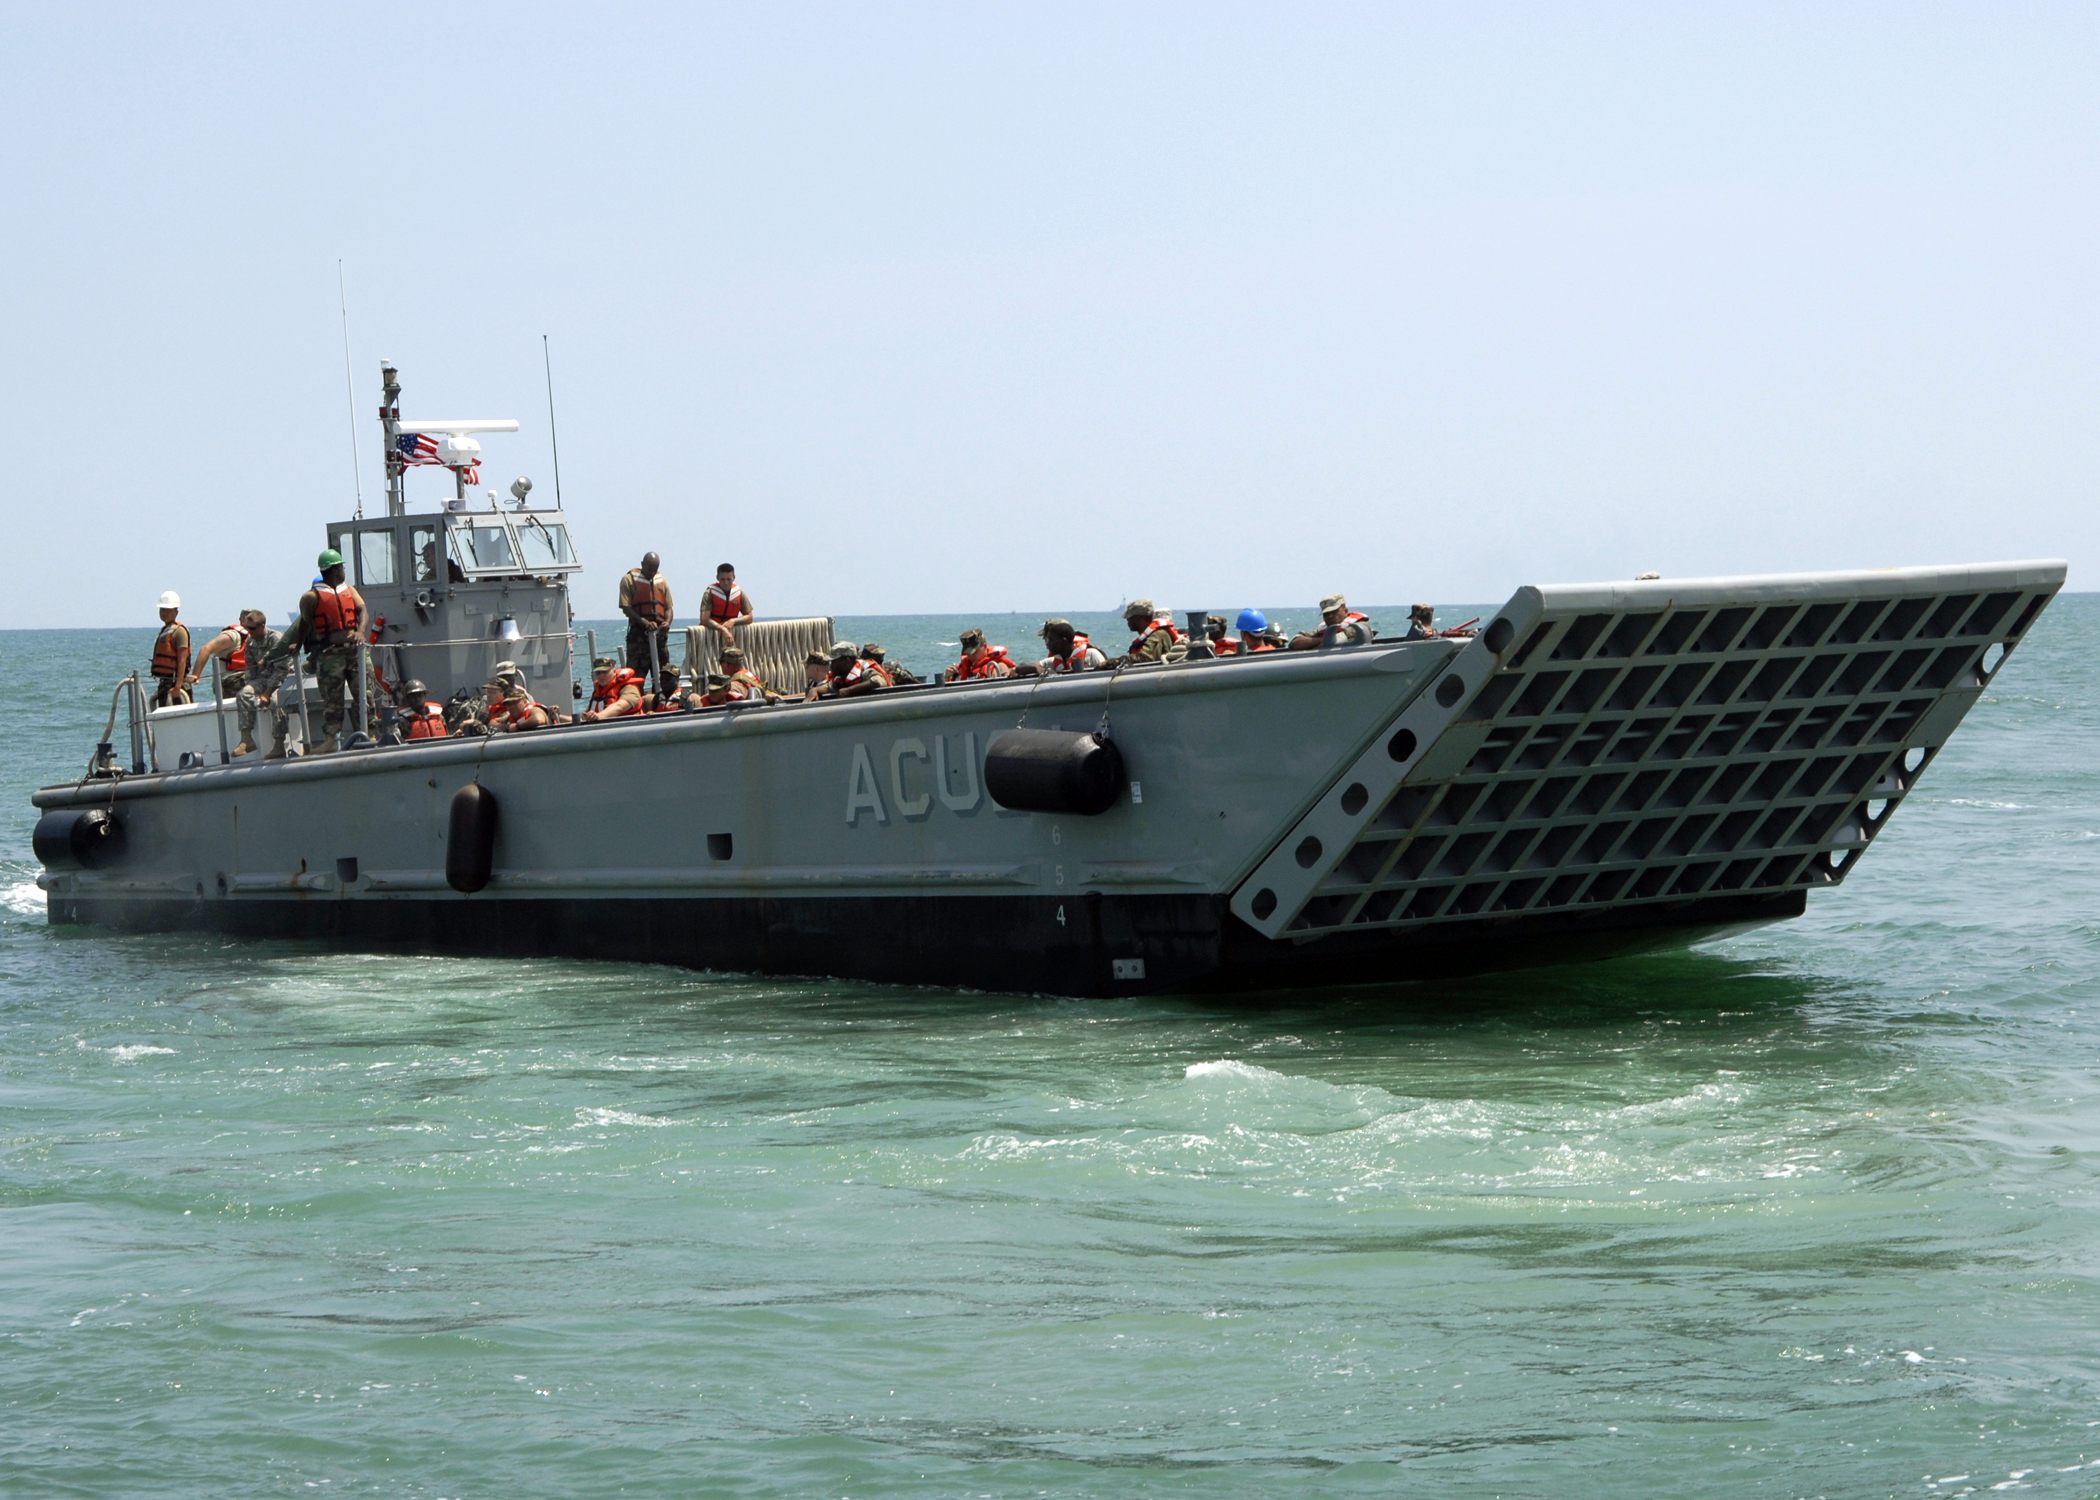 US_Navy_090615-N-6676S-456_Landing_Craft_Mechanized_(LCM)_14,_assigned_to_Assault_Craft_Unit_(ACU)_2,_transports_Sailors,_Soldiers_and_Marines_during_operations_supporting_Joint_Logistics_Over-The-Shore_(JLOTS)_exercises.jpg